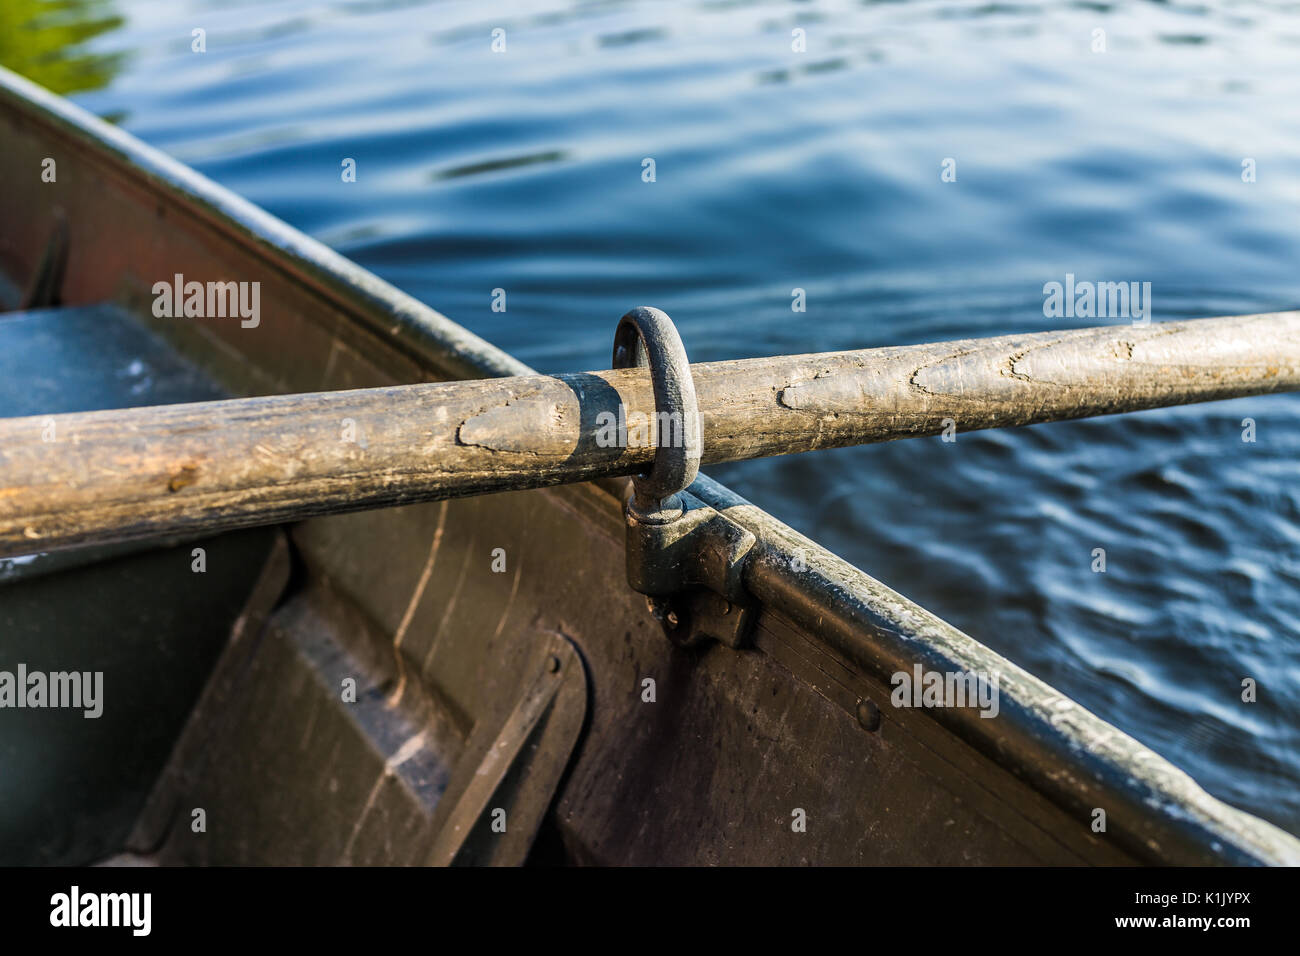 Row boat oar lock closeup in hole during summer with water Stock Photo